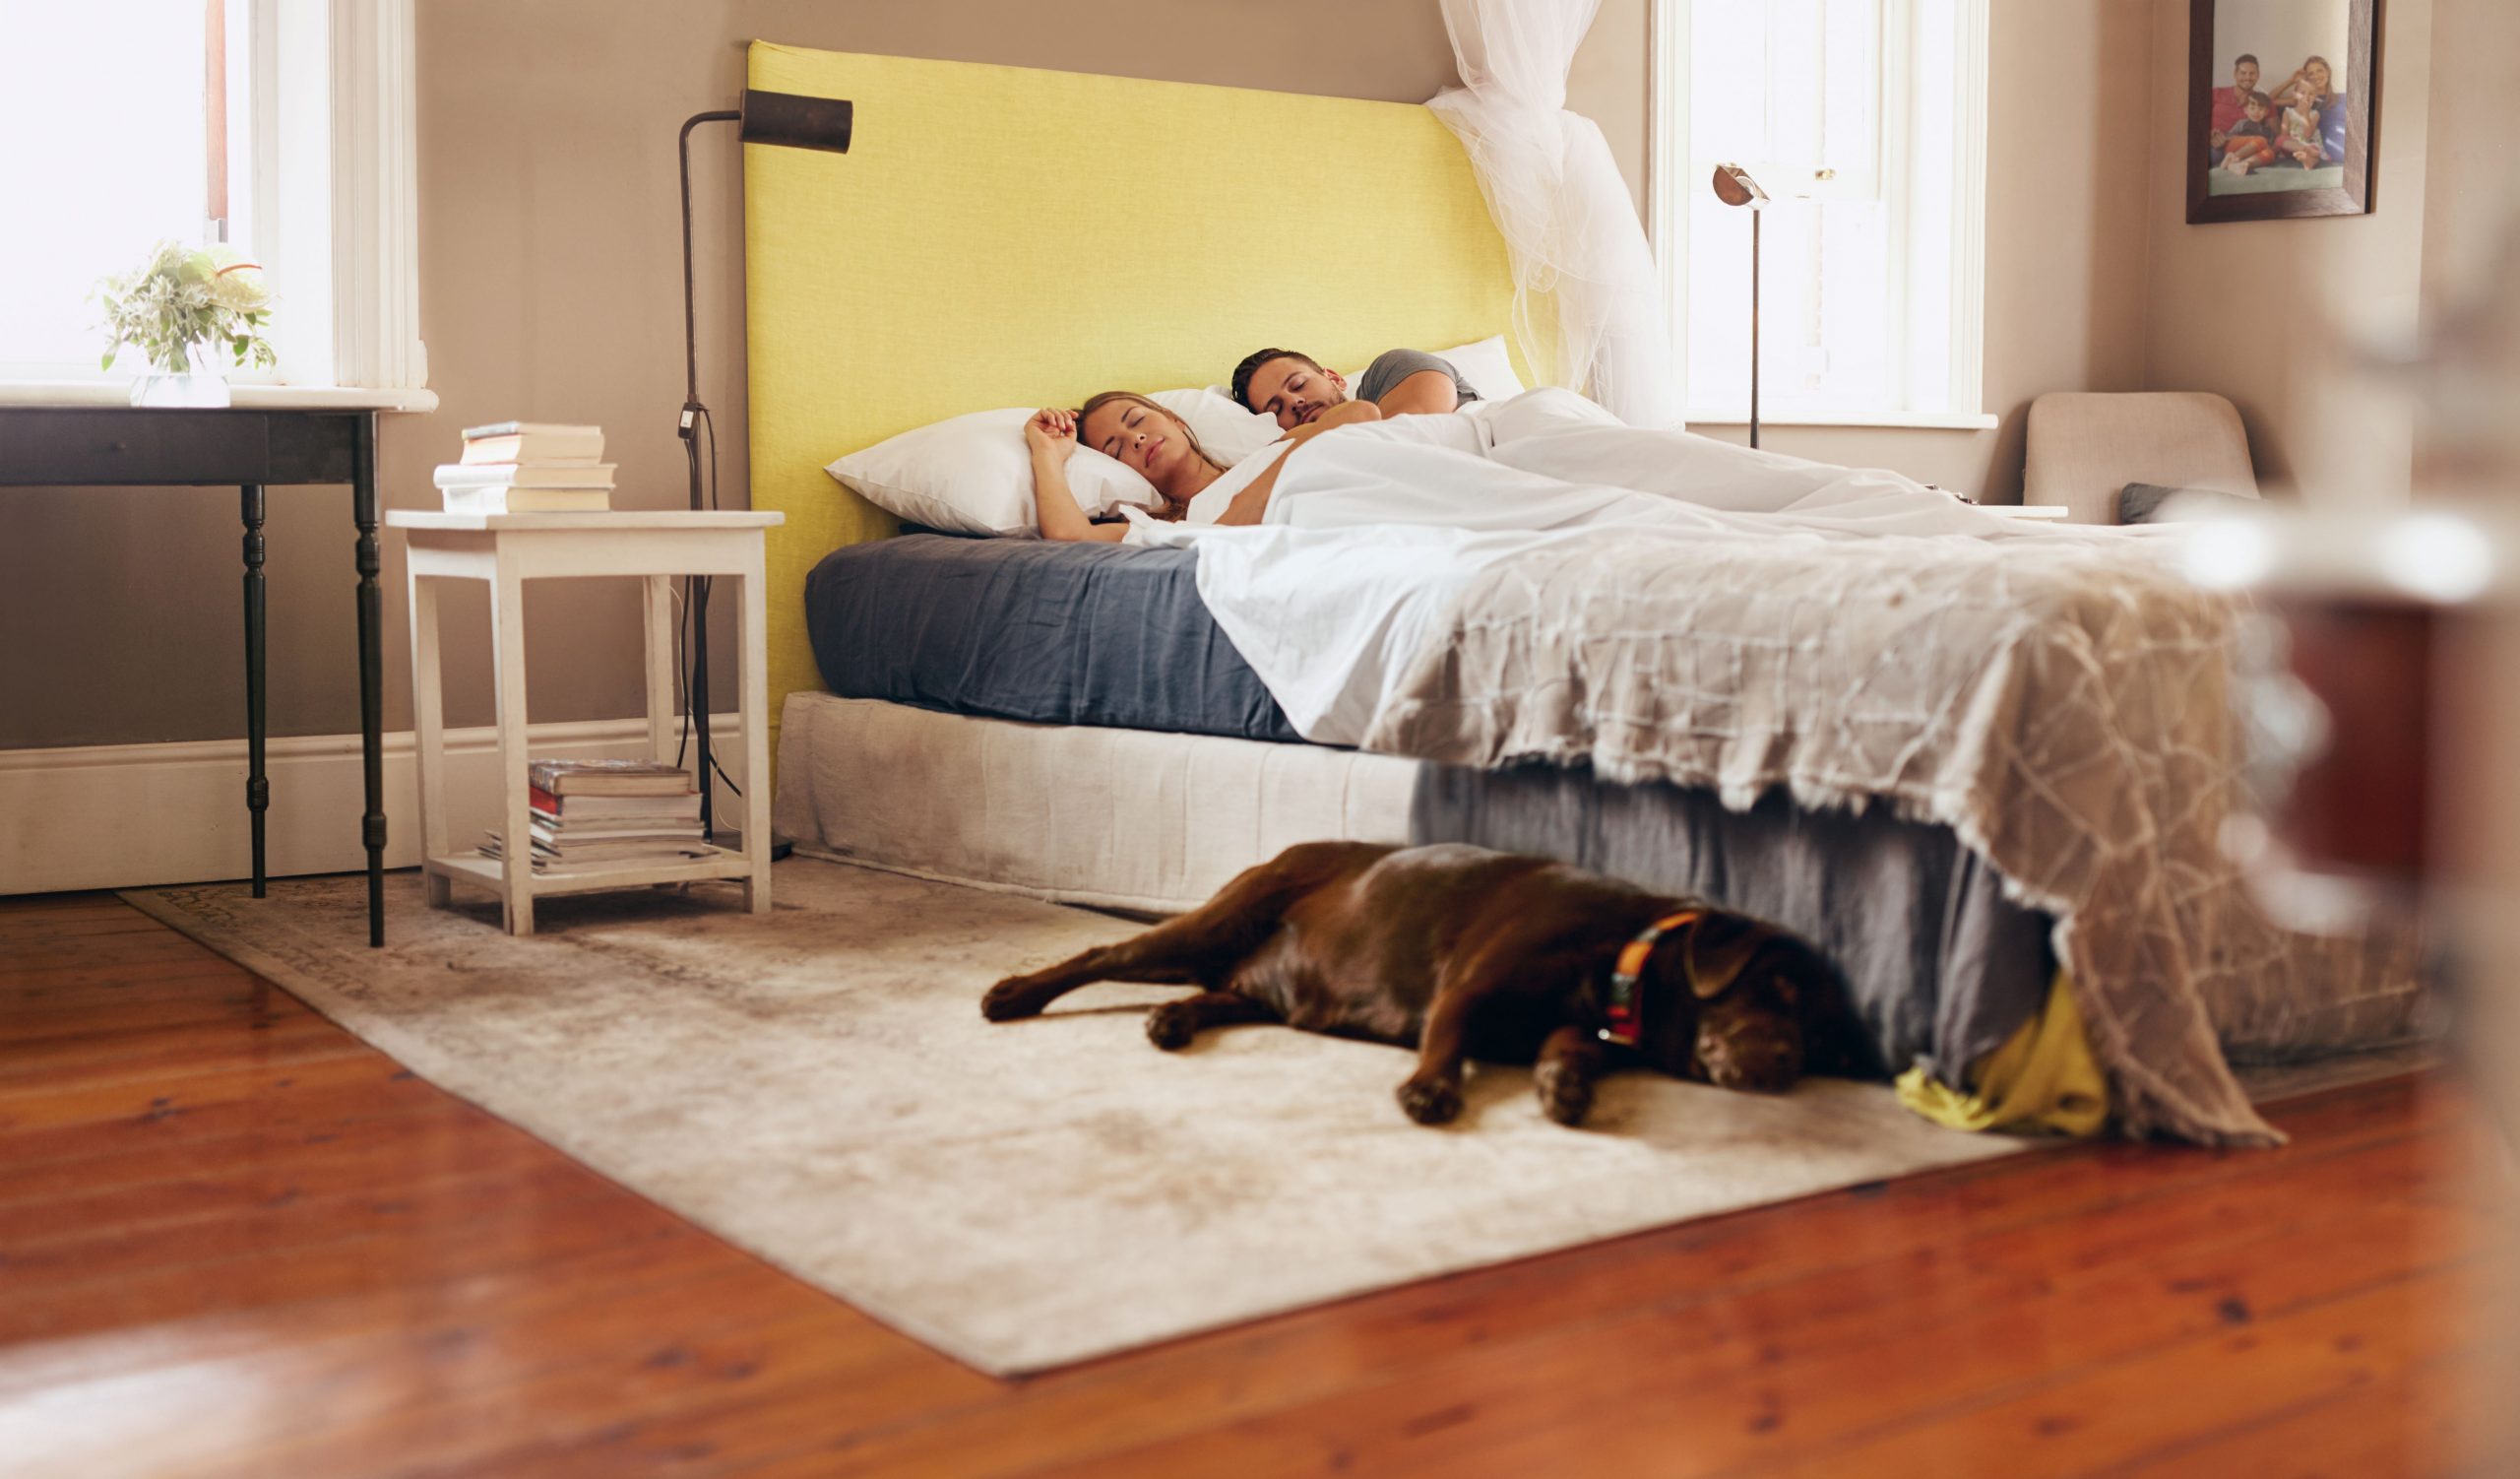 young-couple-sleeping-comfortably-on-bed-with-dog-PC9MZYJ